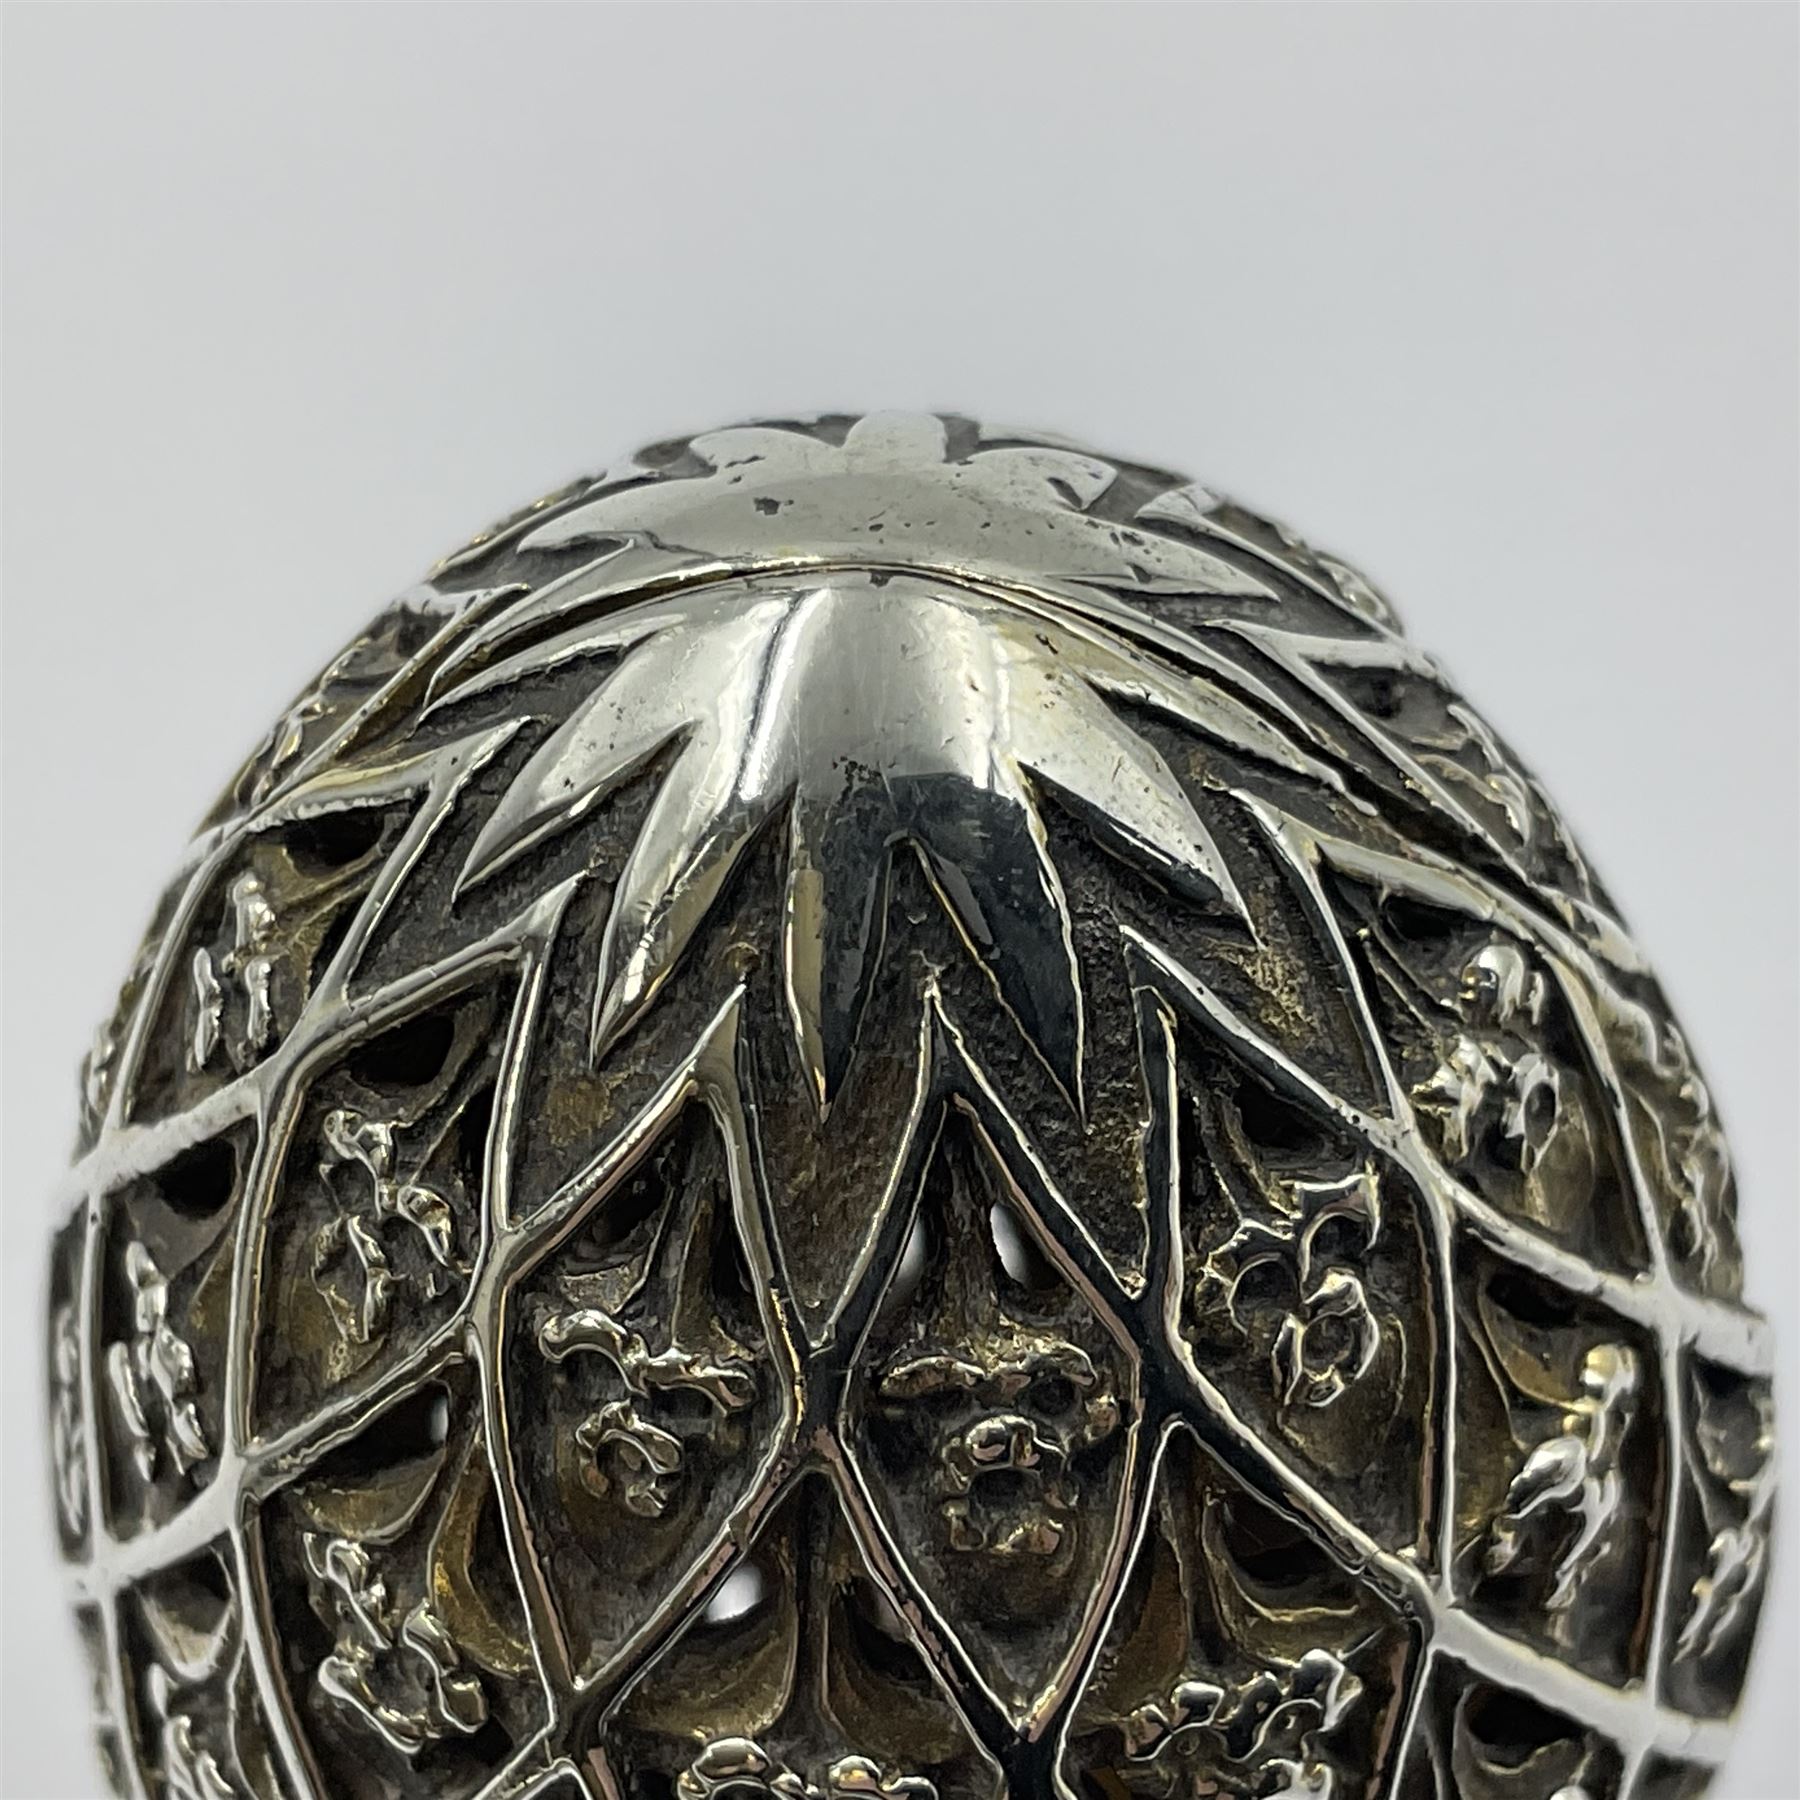 Modern silver limited edition Easter egg - Image 19 of 19